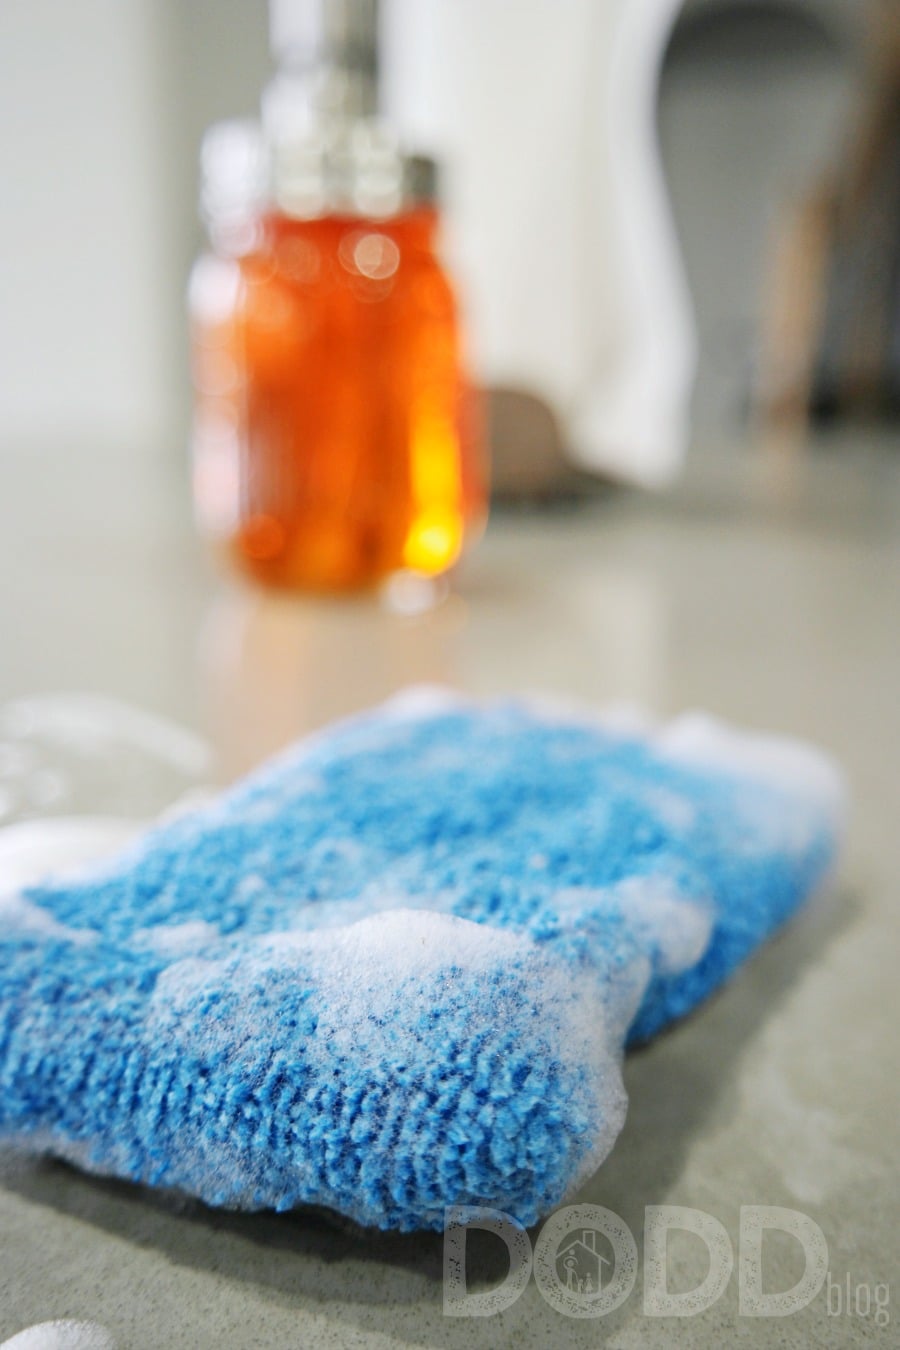 Soap and Water How to clean quartz countertops